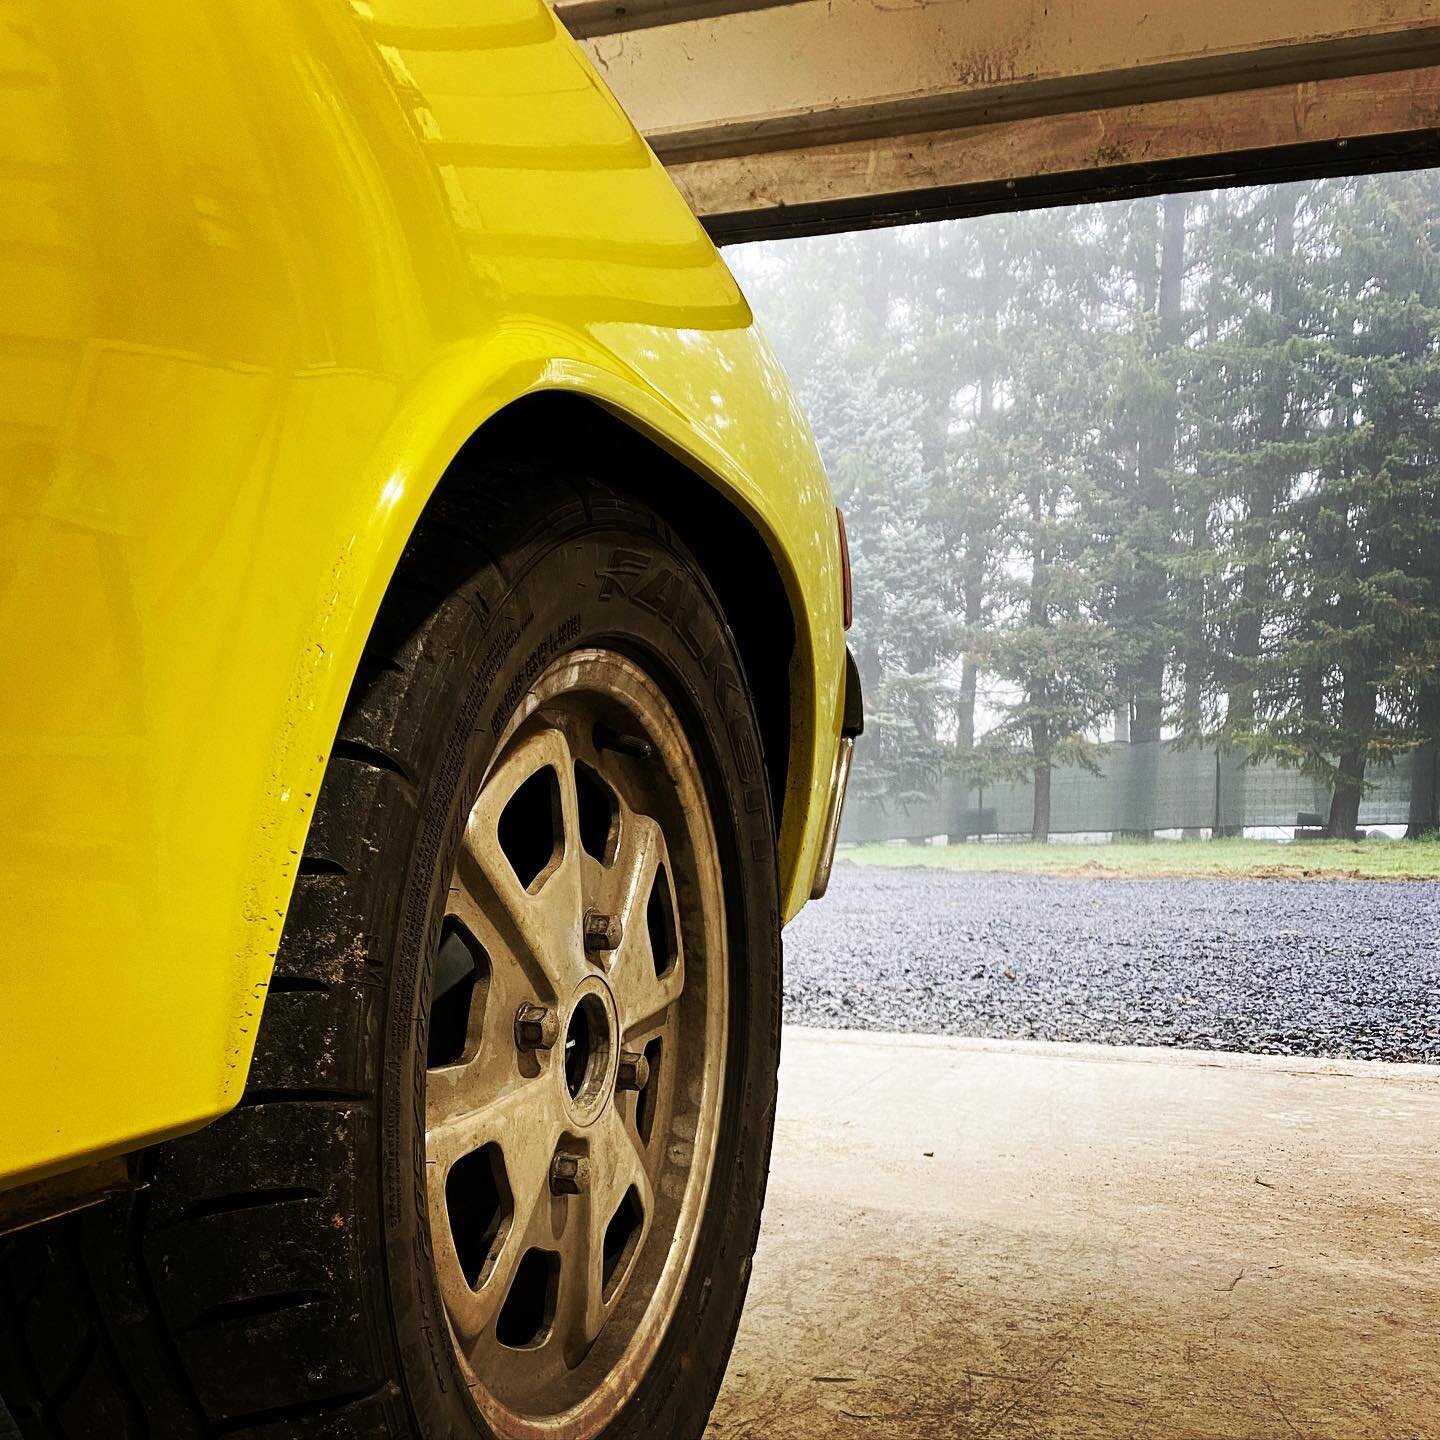 Tuning in Oregon. Sometimes this D-Jet makes you want to tear your hair out. #djet #fuelinjection #djetronic #tuning #oldfuelinjection #porsche914 #porsche914restoration #porscherestoration #runningwheels #keepgoing #oldcarproblems #oldporsche #airco